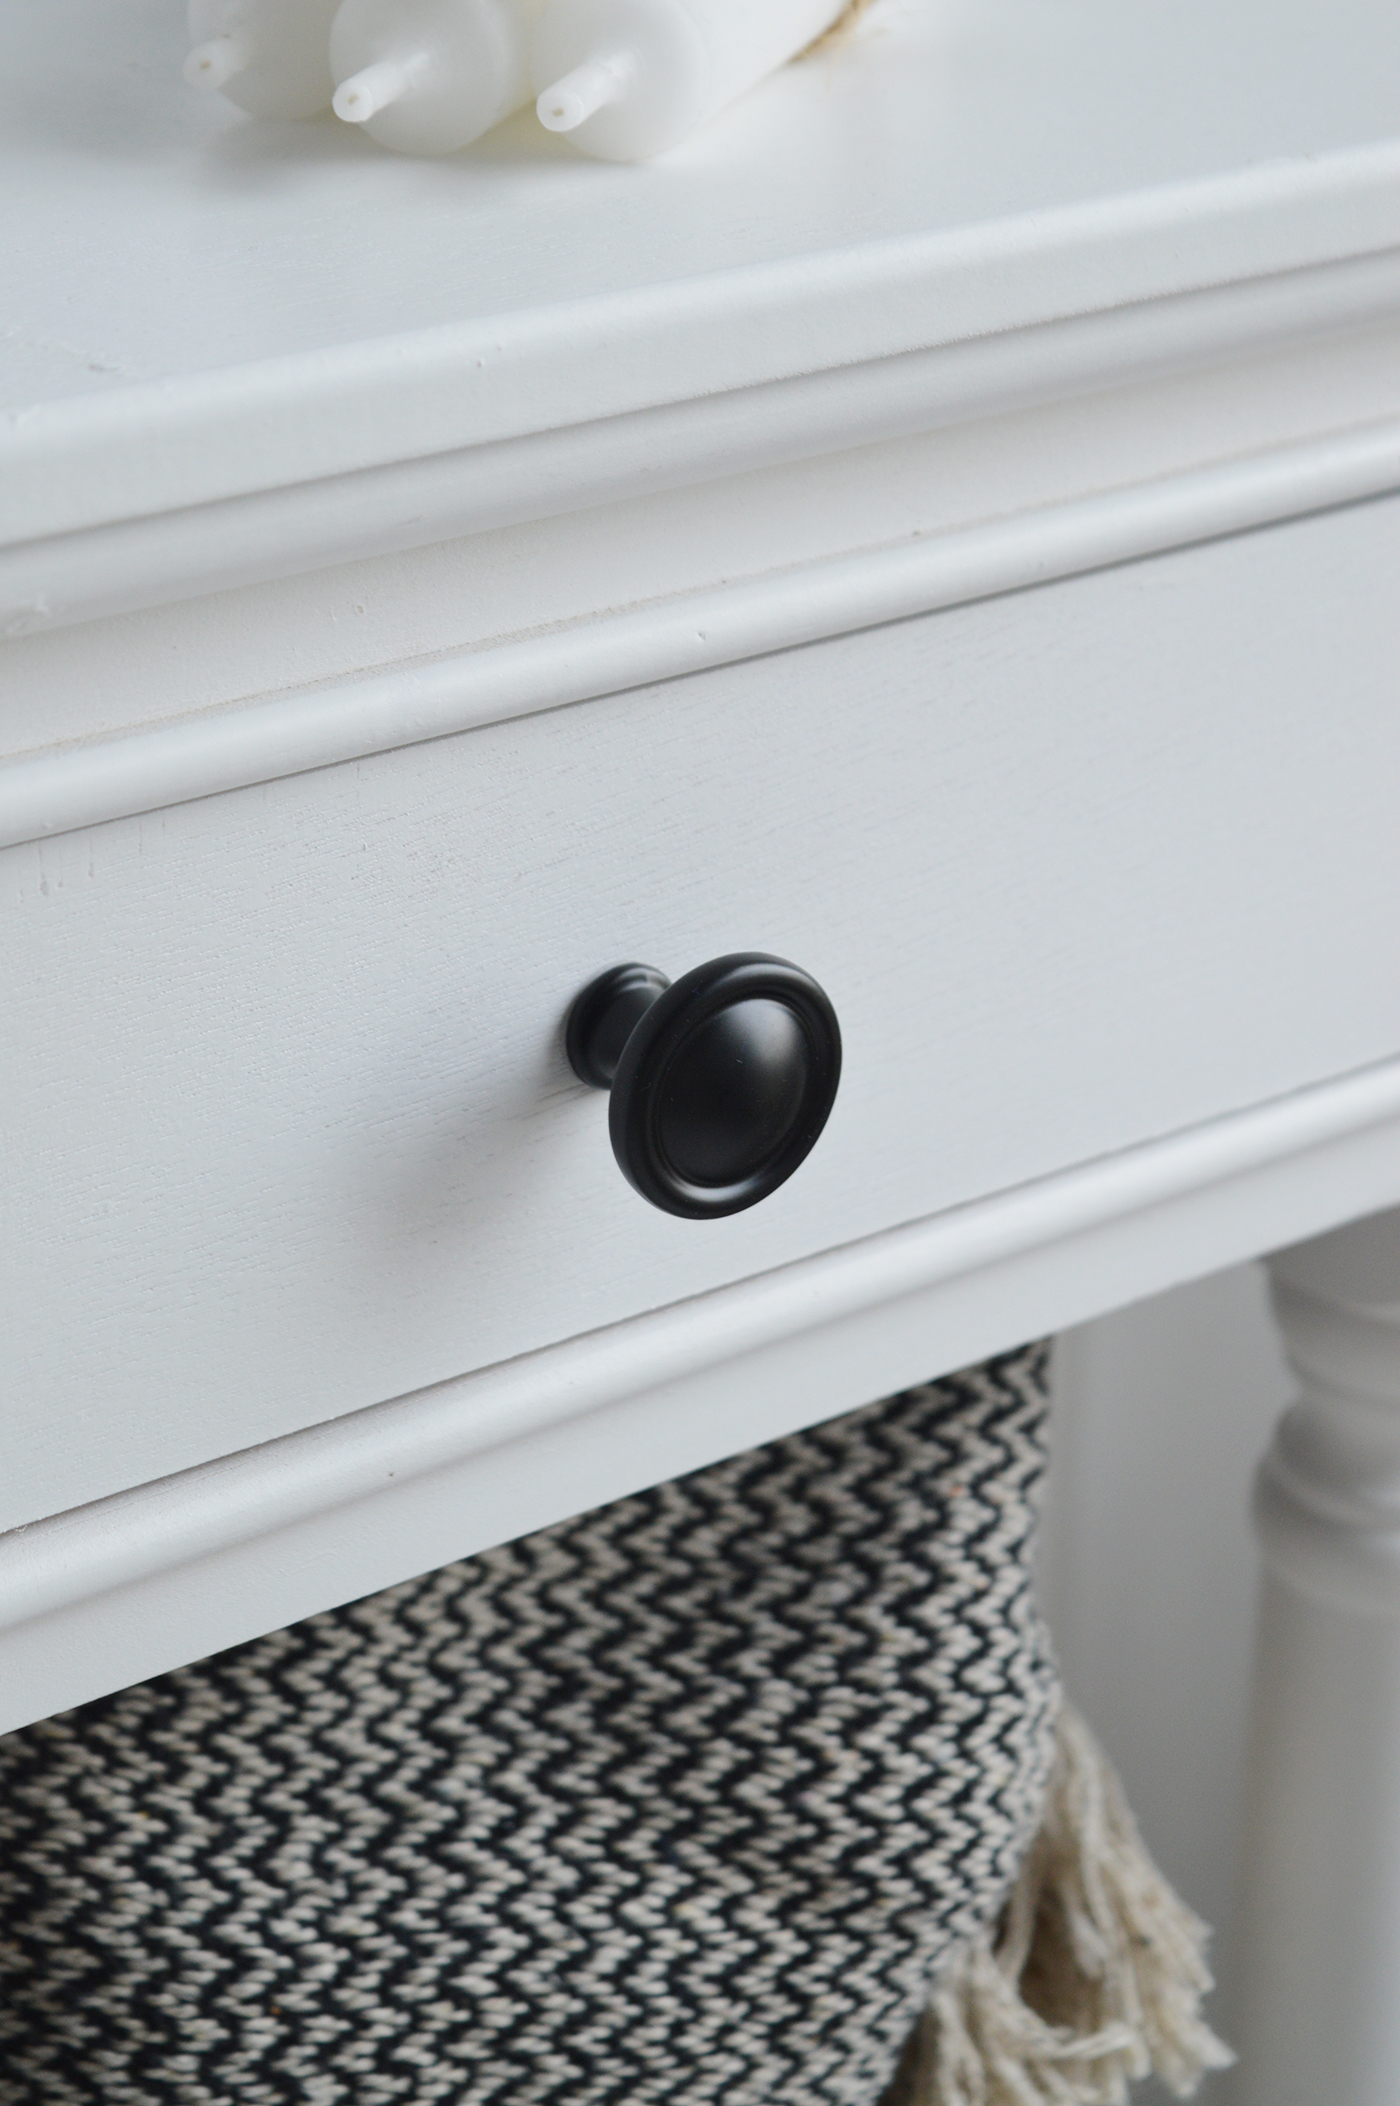 A close up photo of the black handle on each of the three drawers